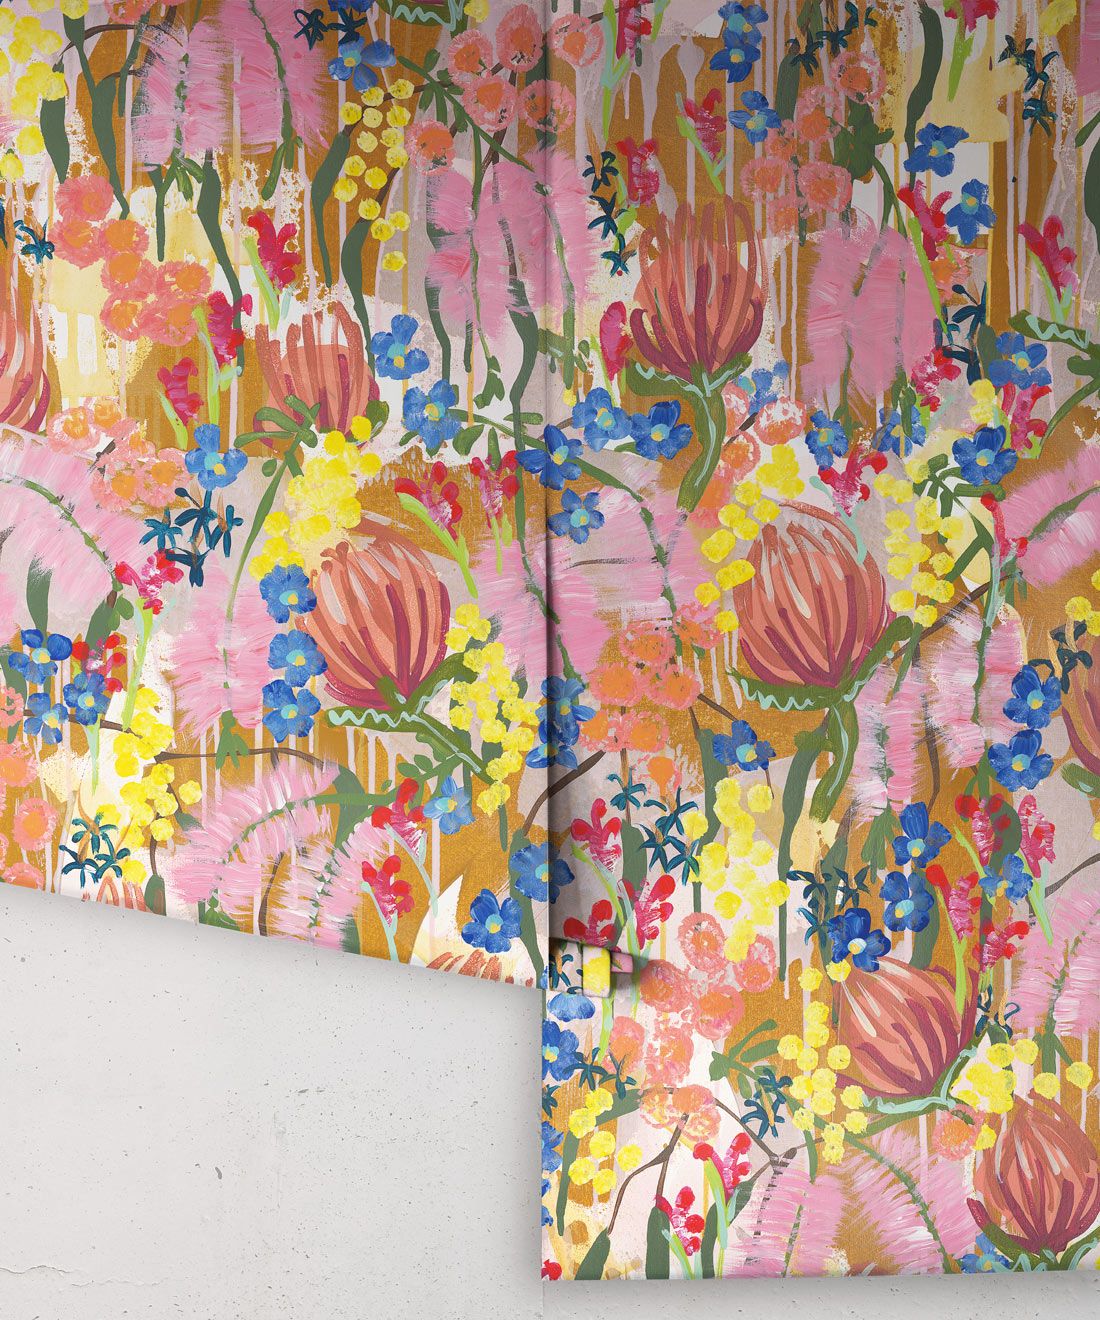 Acacia Wallpaper • Colourful Floral Wallpaper • Tiff Manuell • Abstract Expressionist Wallpaper • Rolls